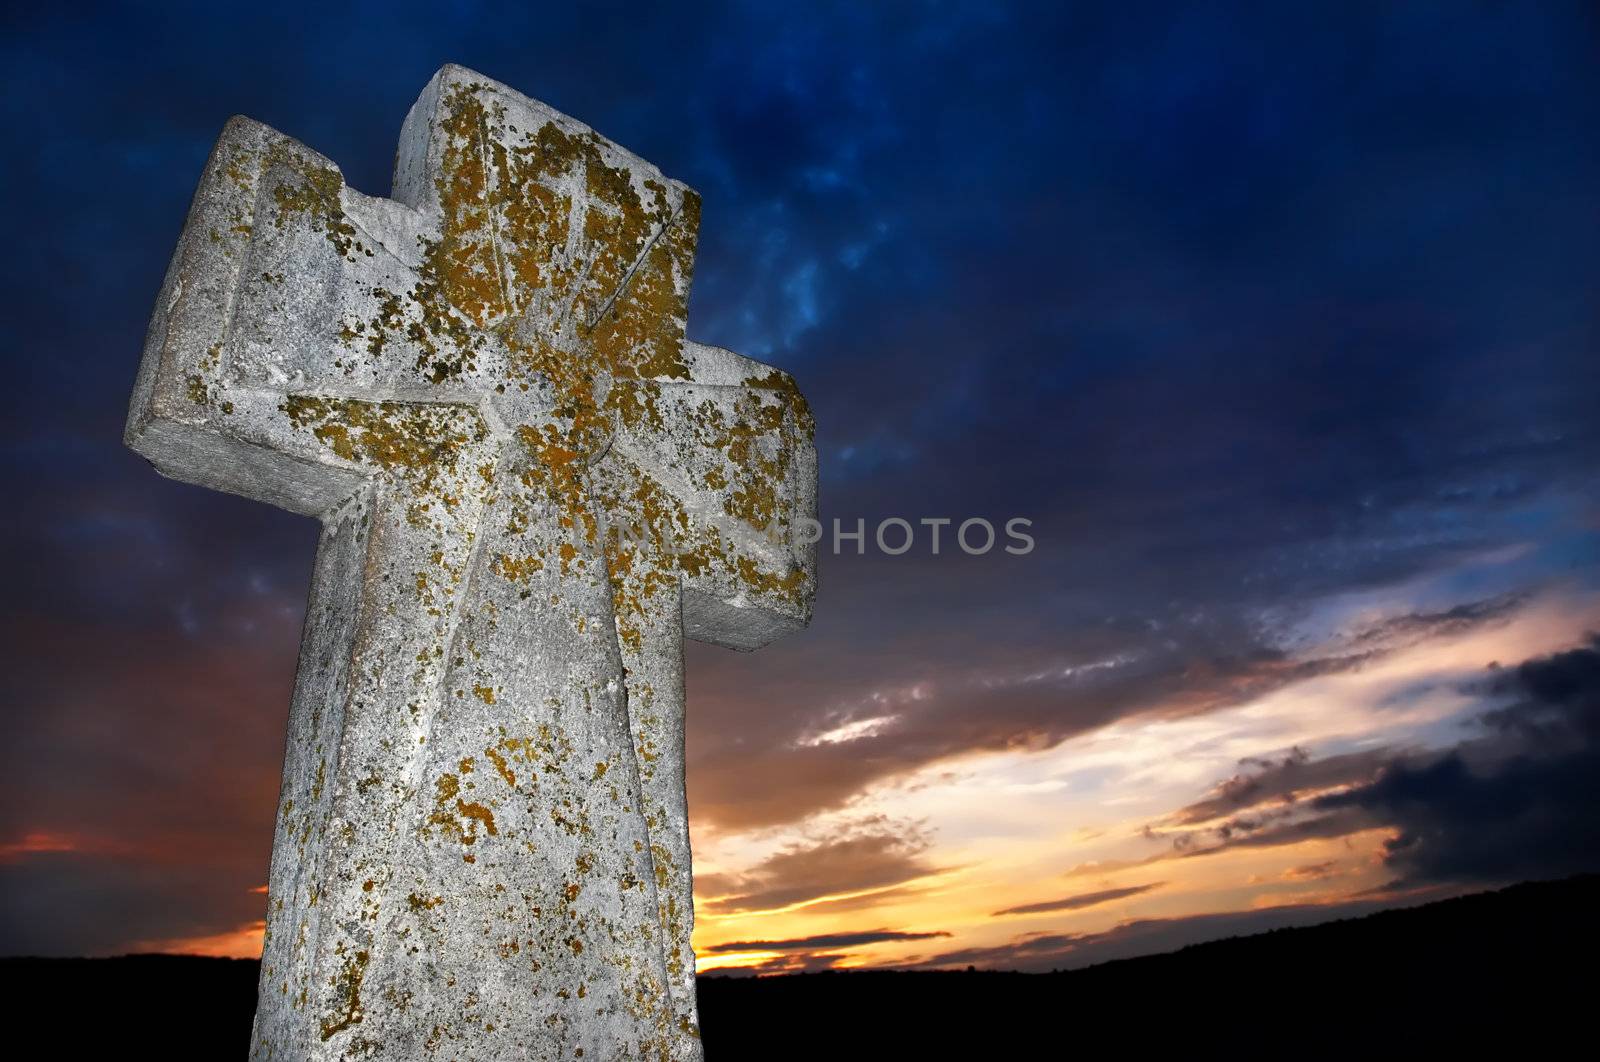 brightly lit stone cross on the sunset background